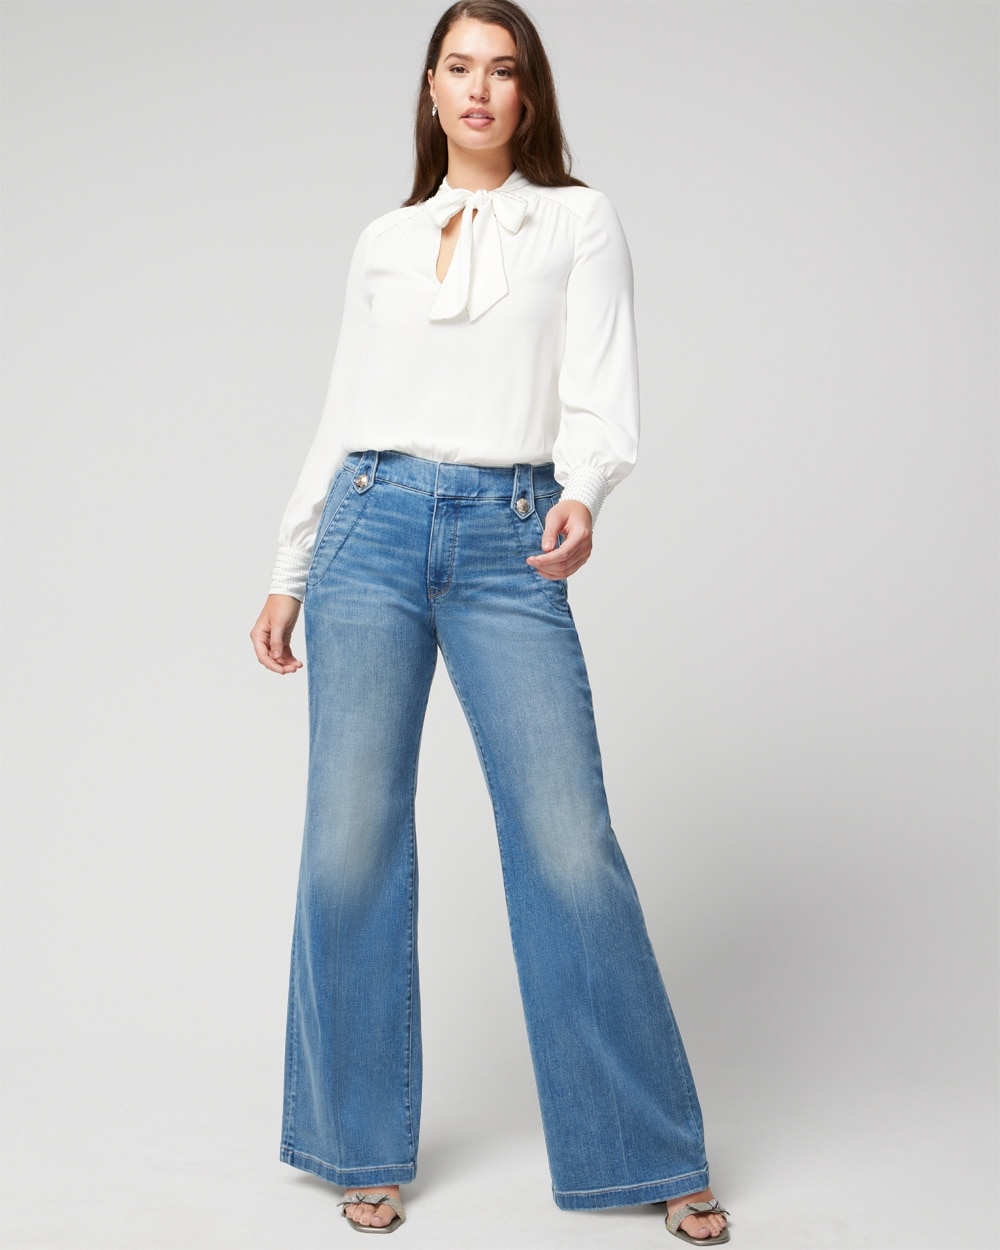 White House Black Market High-rise Every Day Soft Novelty Button Wide-leg Pants In Medium Wash Denim